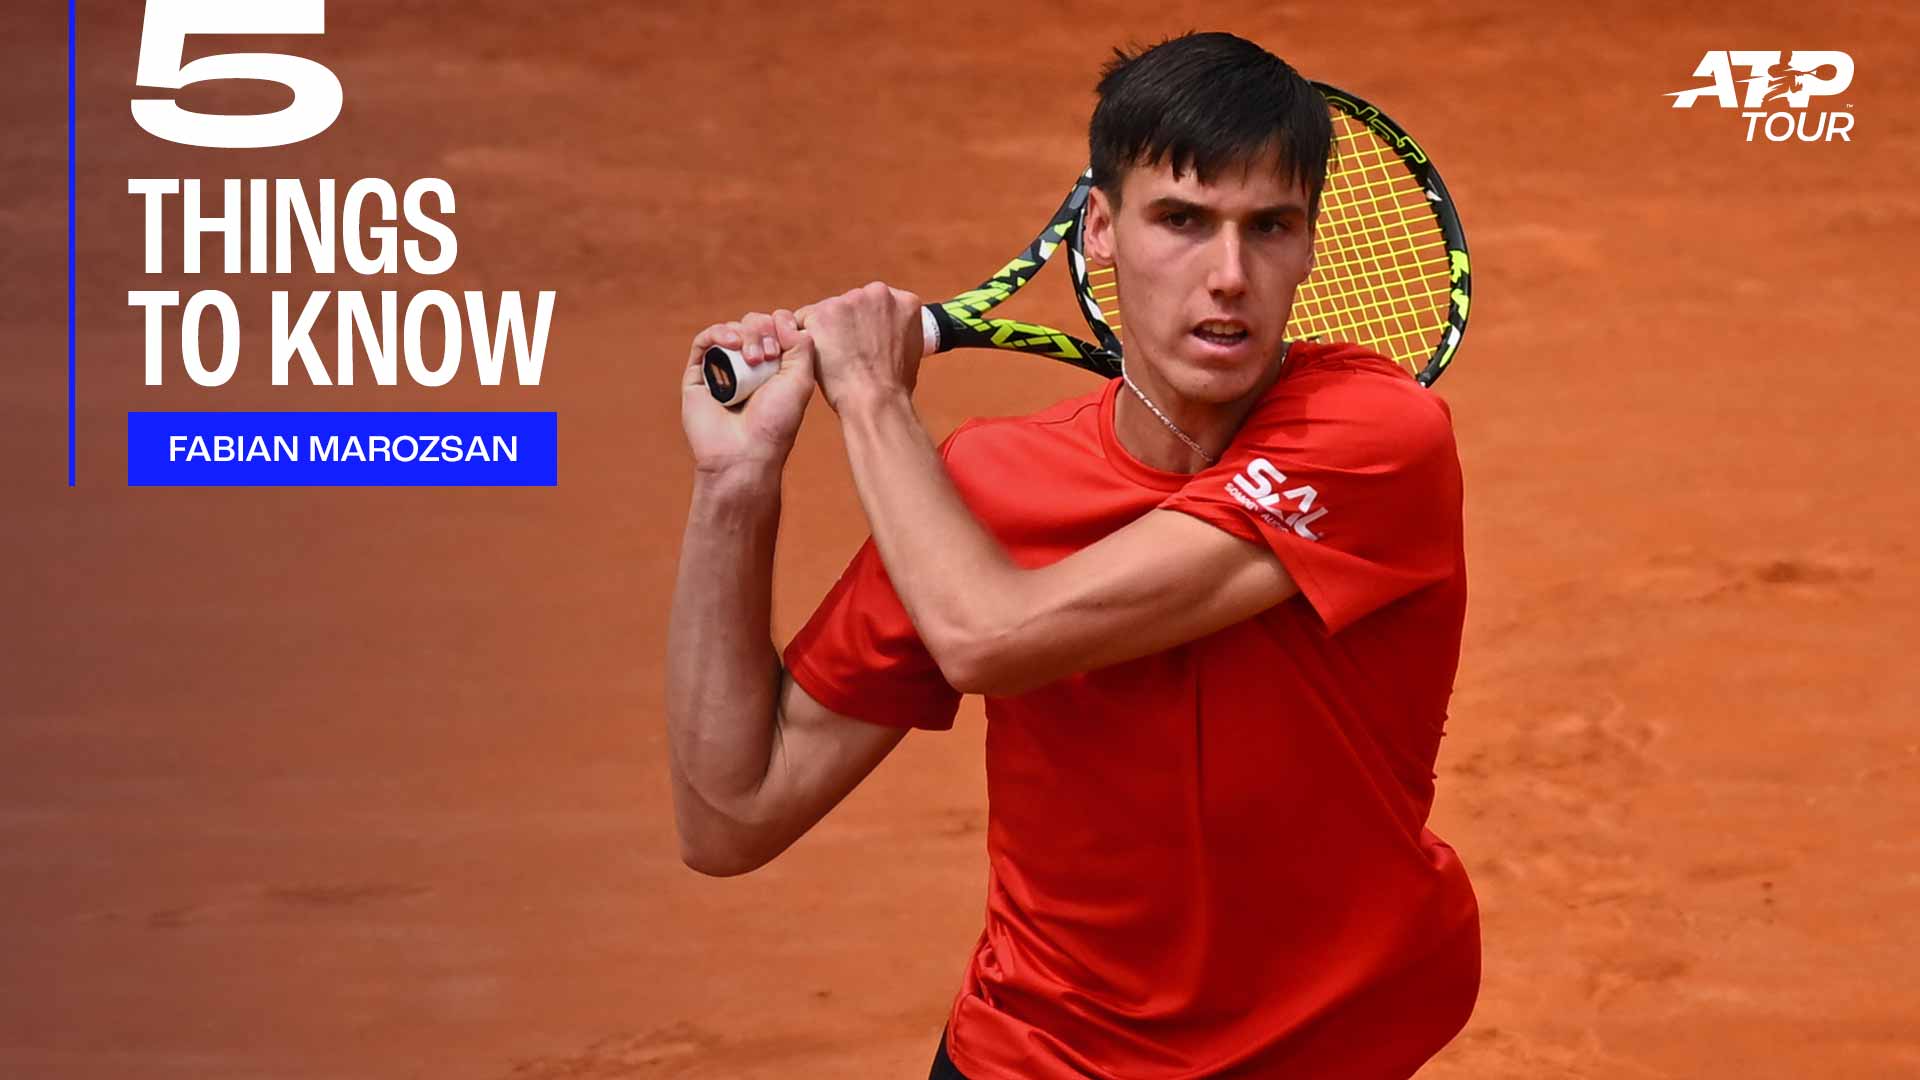 Fabian Marozsan is competing in his first ATP Tour main draw in Rome.